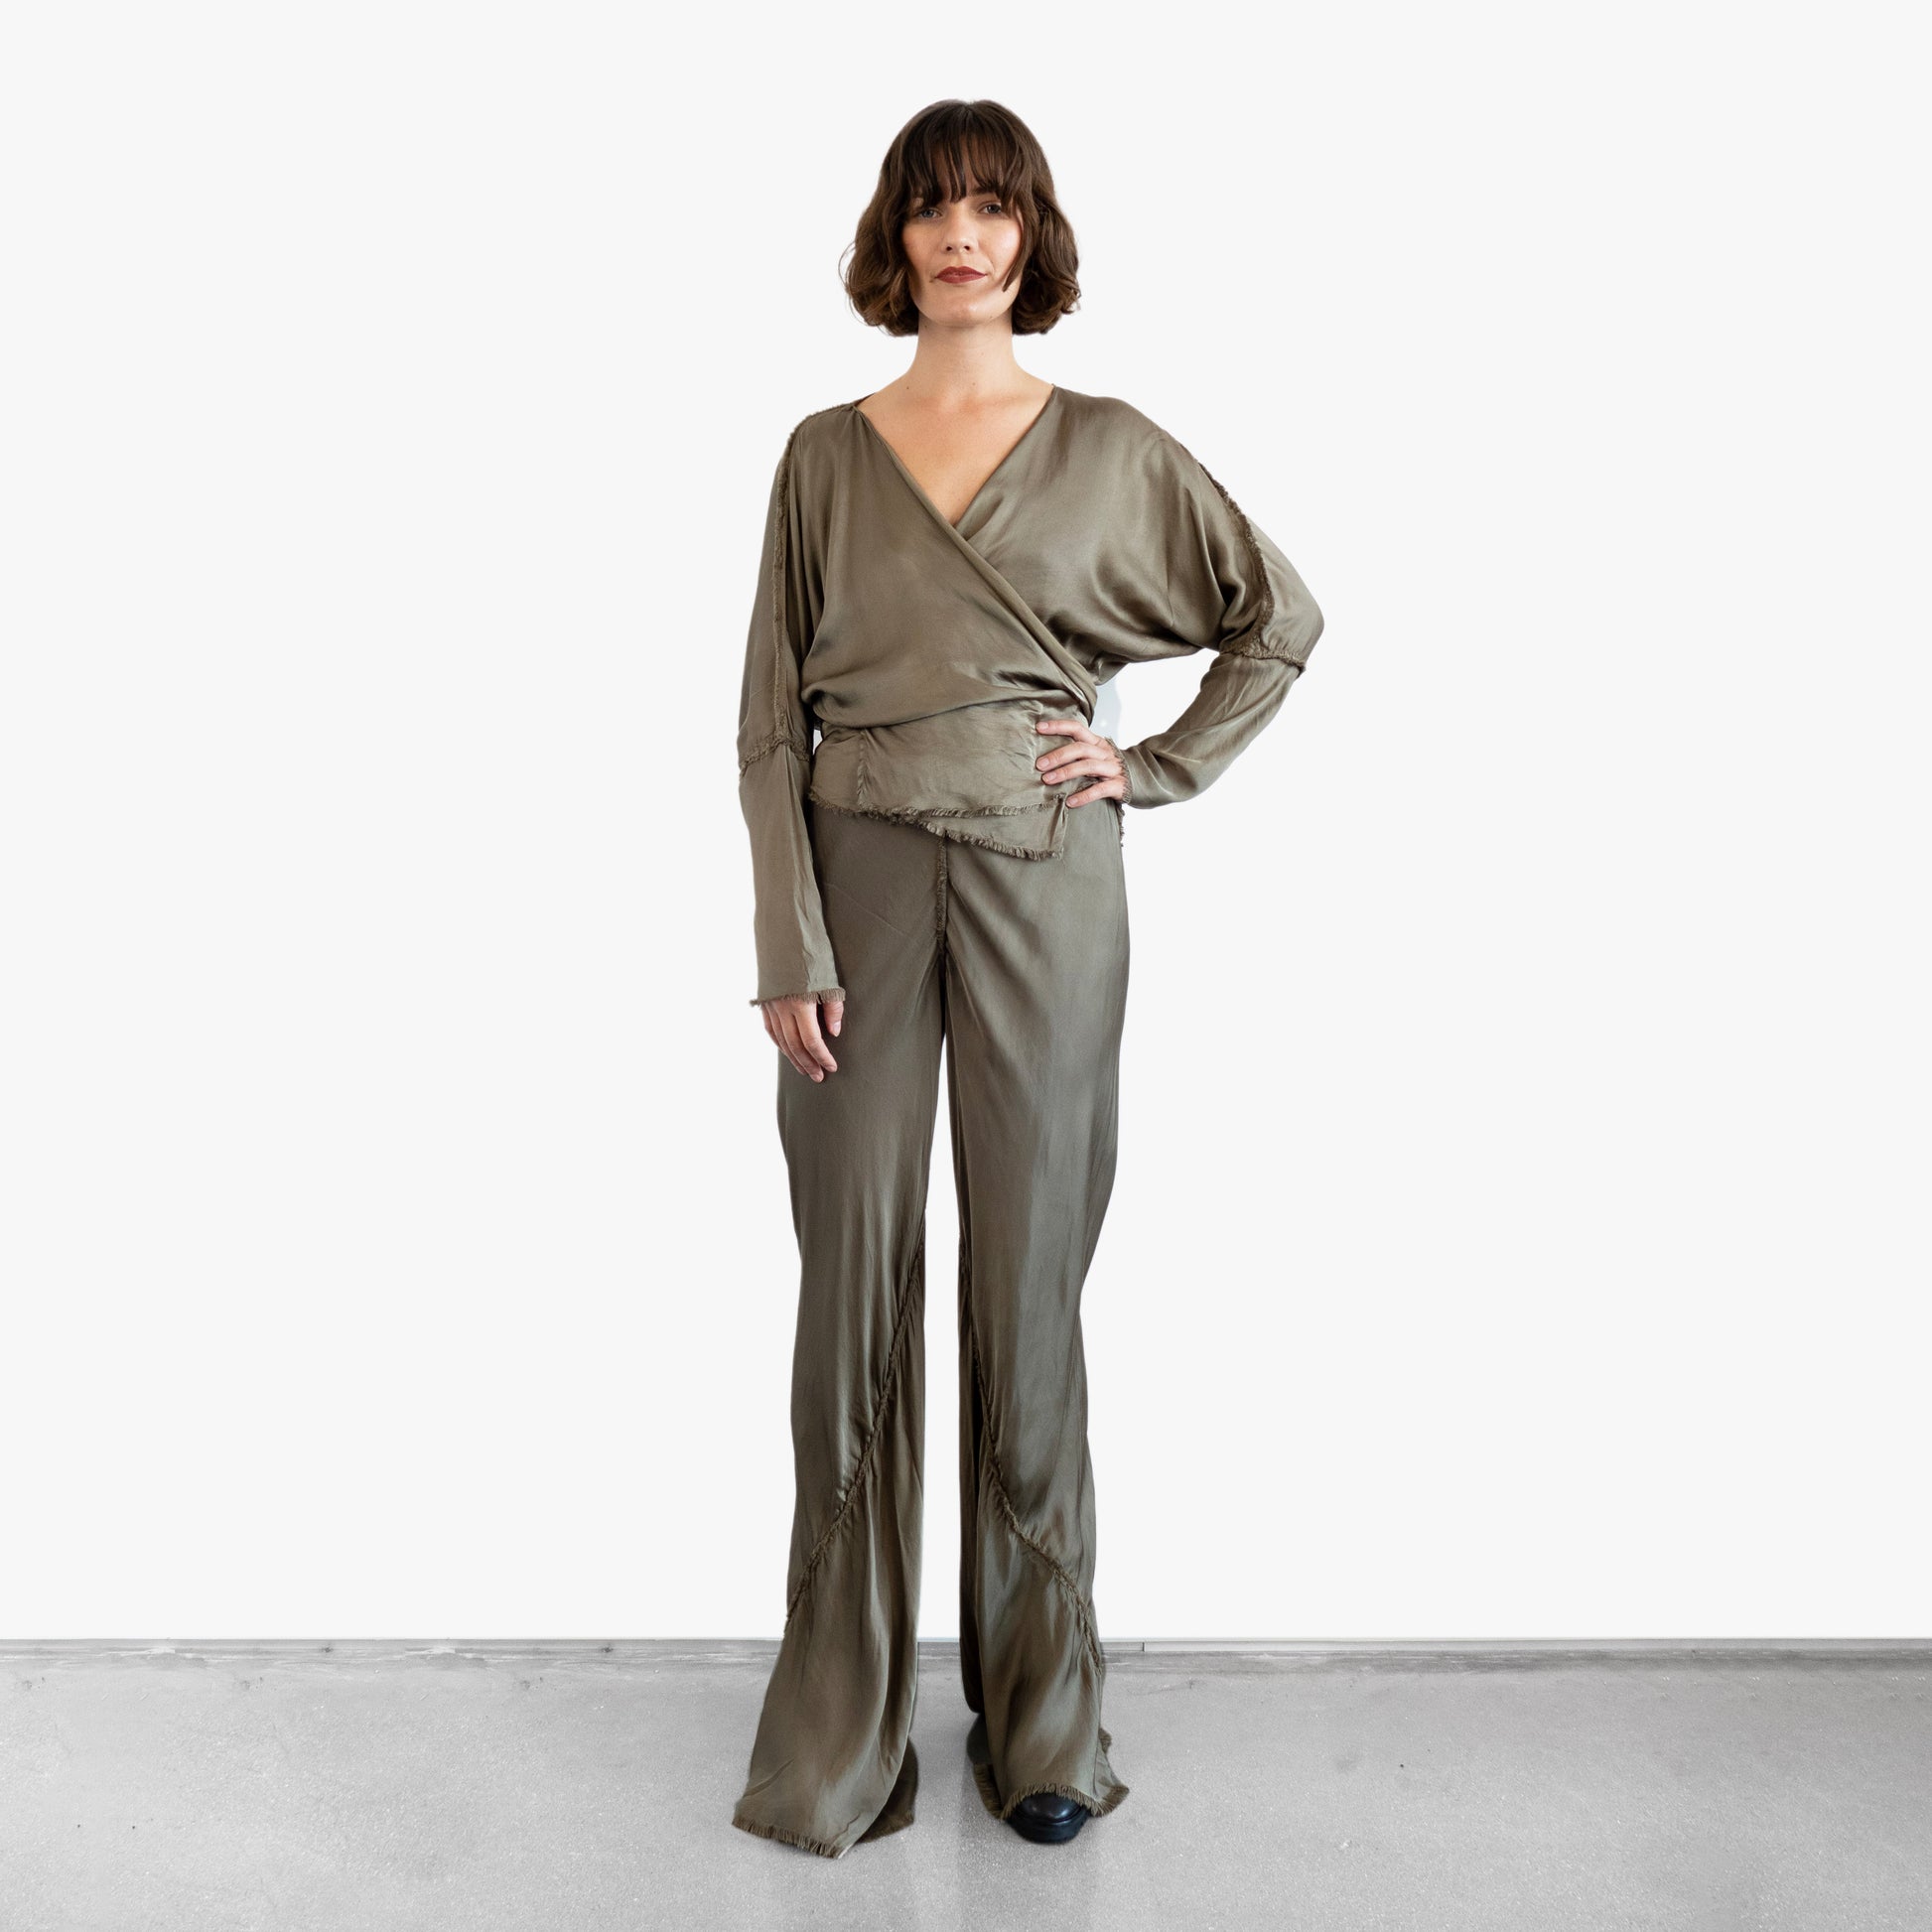 Model wearing a green silk wrap top and silk pants